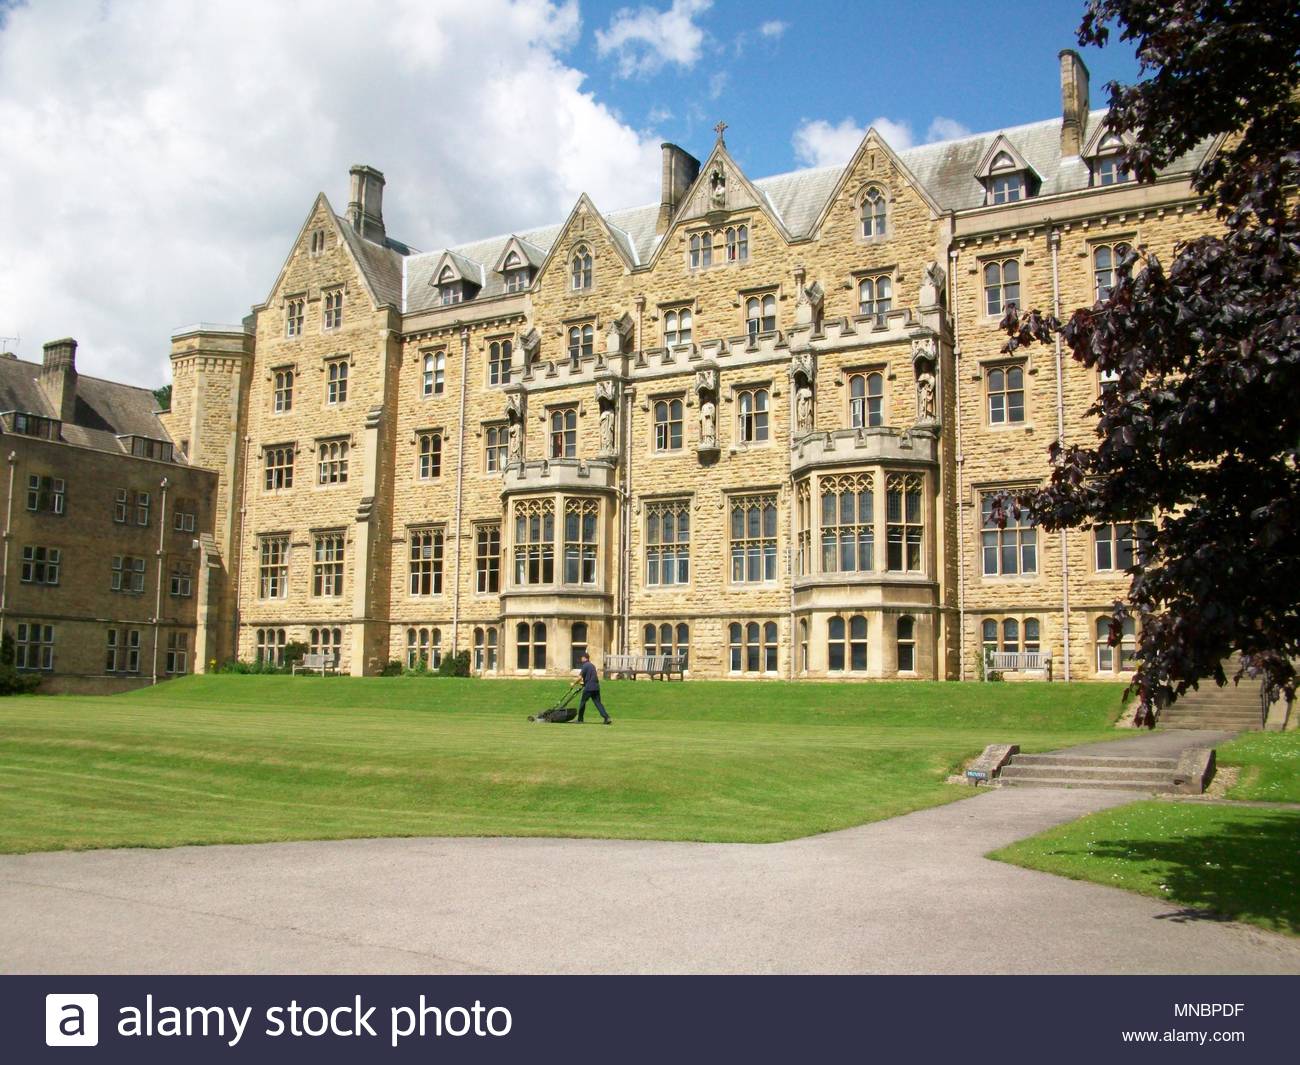 Ampleforth ban on recruitment to stay for now